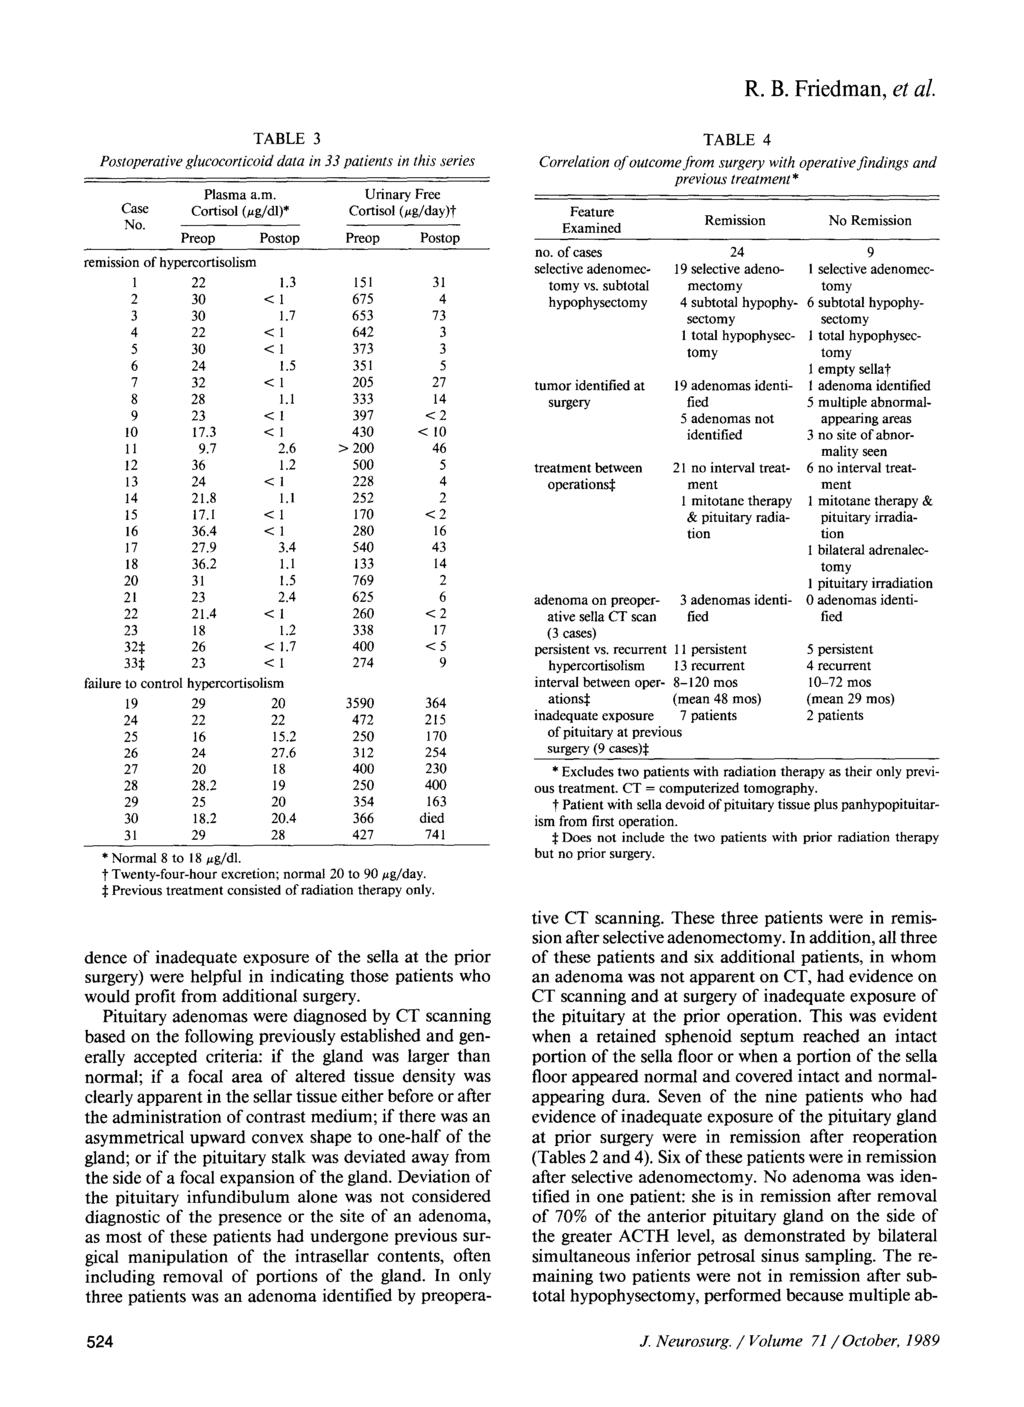 R. B. Friedman, et al. TABLE 3 Postoperative glucocorticoid data in 33 patients in this series Case No. Plasma a.m. Cortisol (ug/dl)* Urinary Free Cortisol (tzg/day)t Preop Postop Preop Postop remission ofhyperco~isolism 1 22 1.